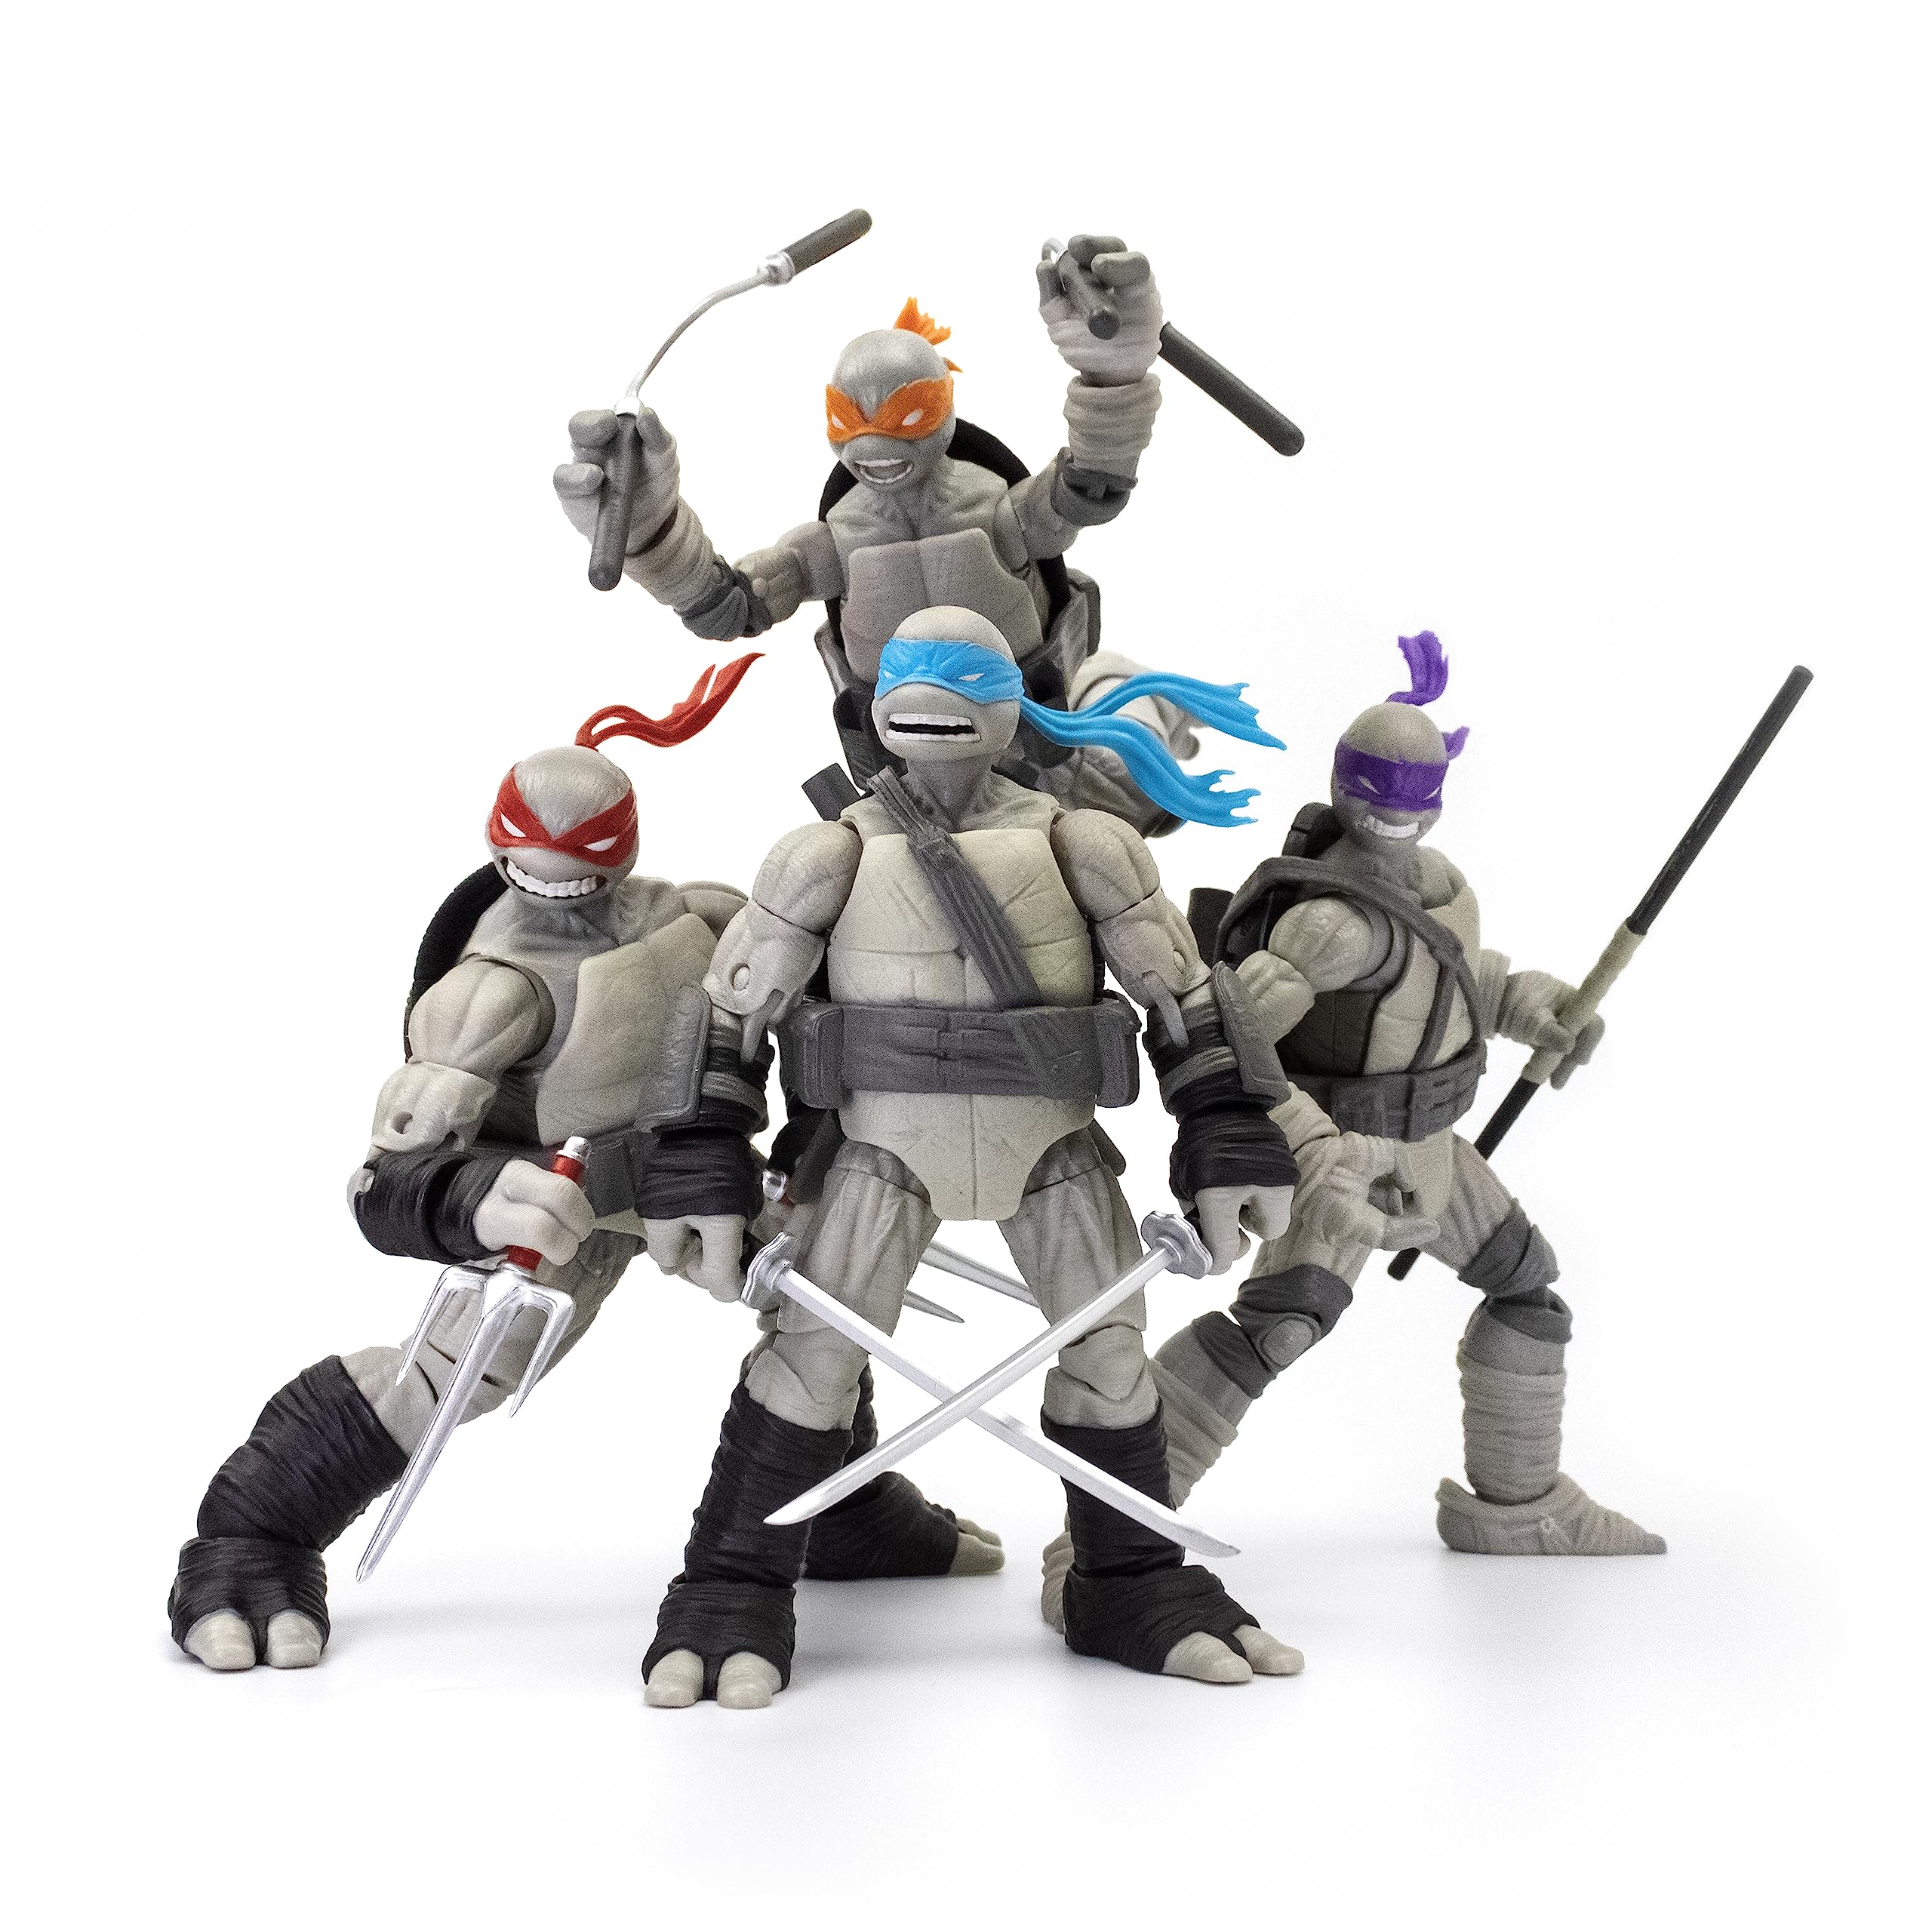 The Loyal Subjects Teenage Mutant Ninja Turtles BST AXN IDW Comic Inspired 'Black & White' 5-inch Action Figure 4-Pack